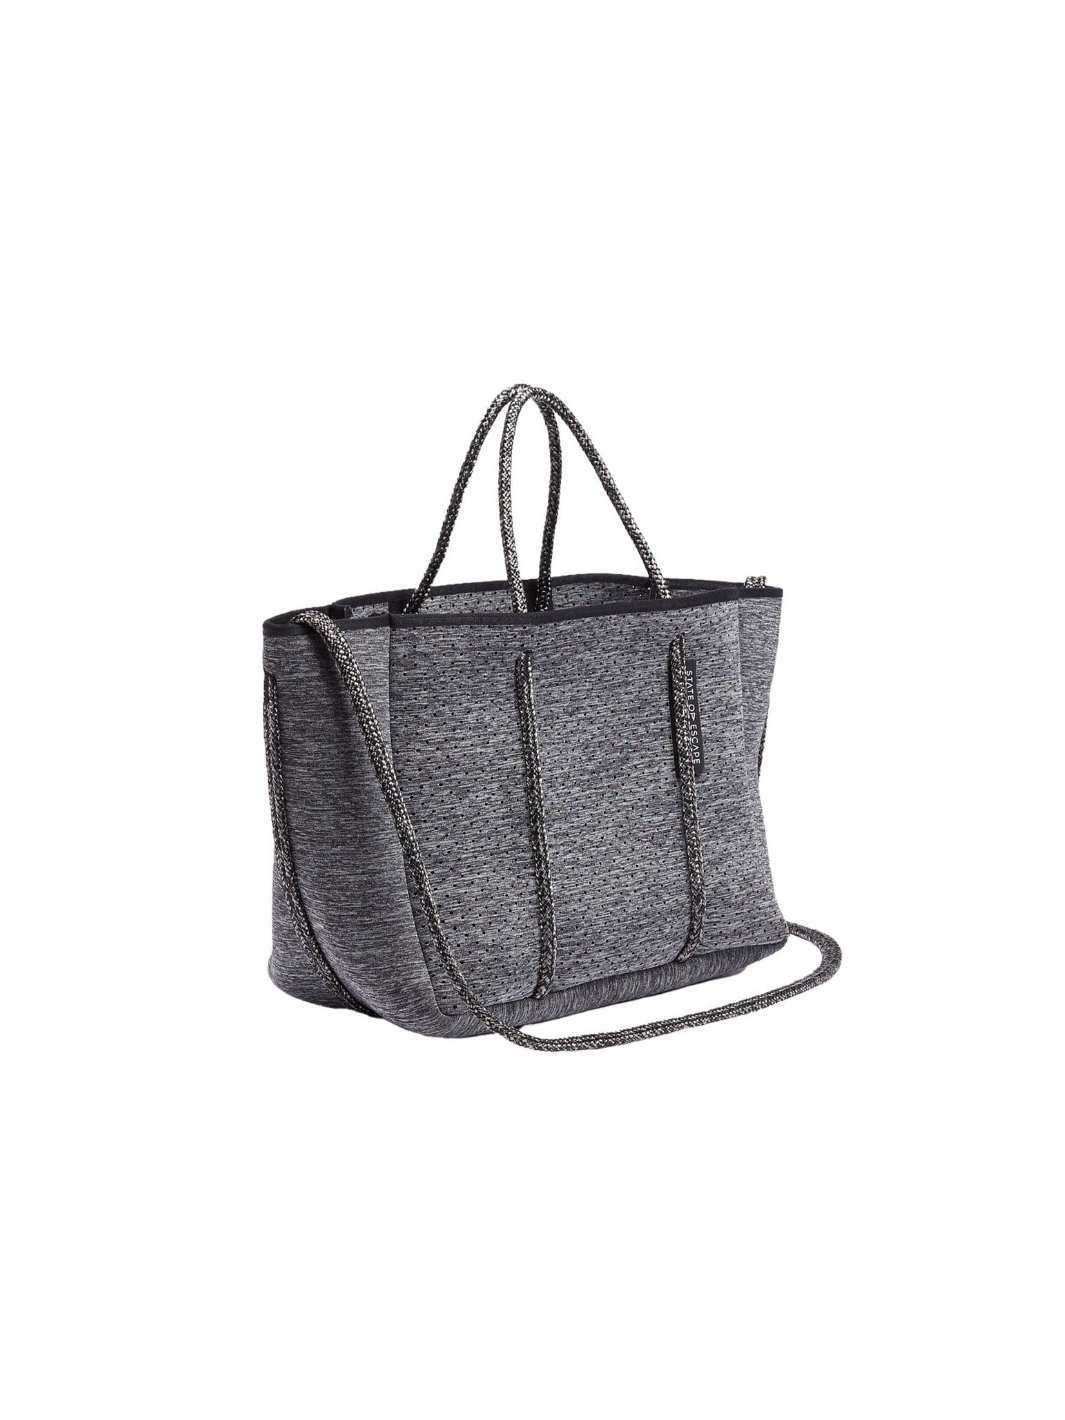 State of Escape Bags Tote Bag | Petite Escape Charcoal Marle